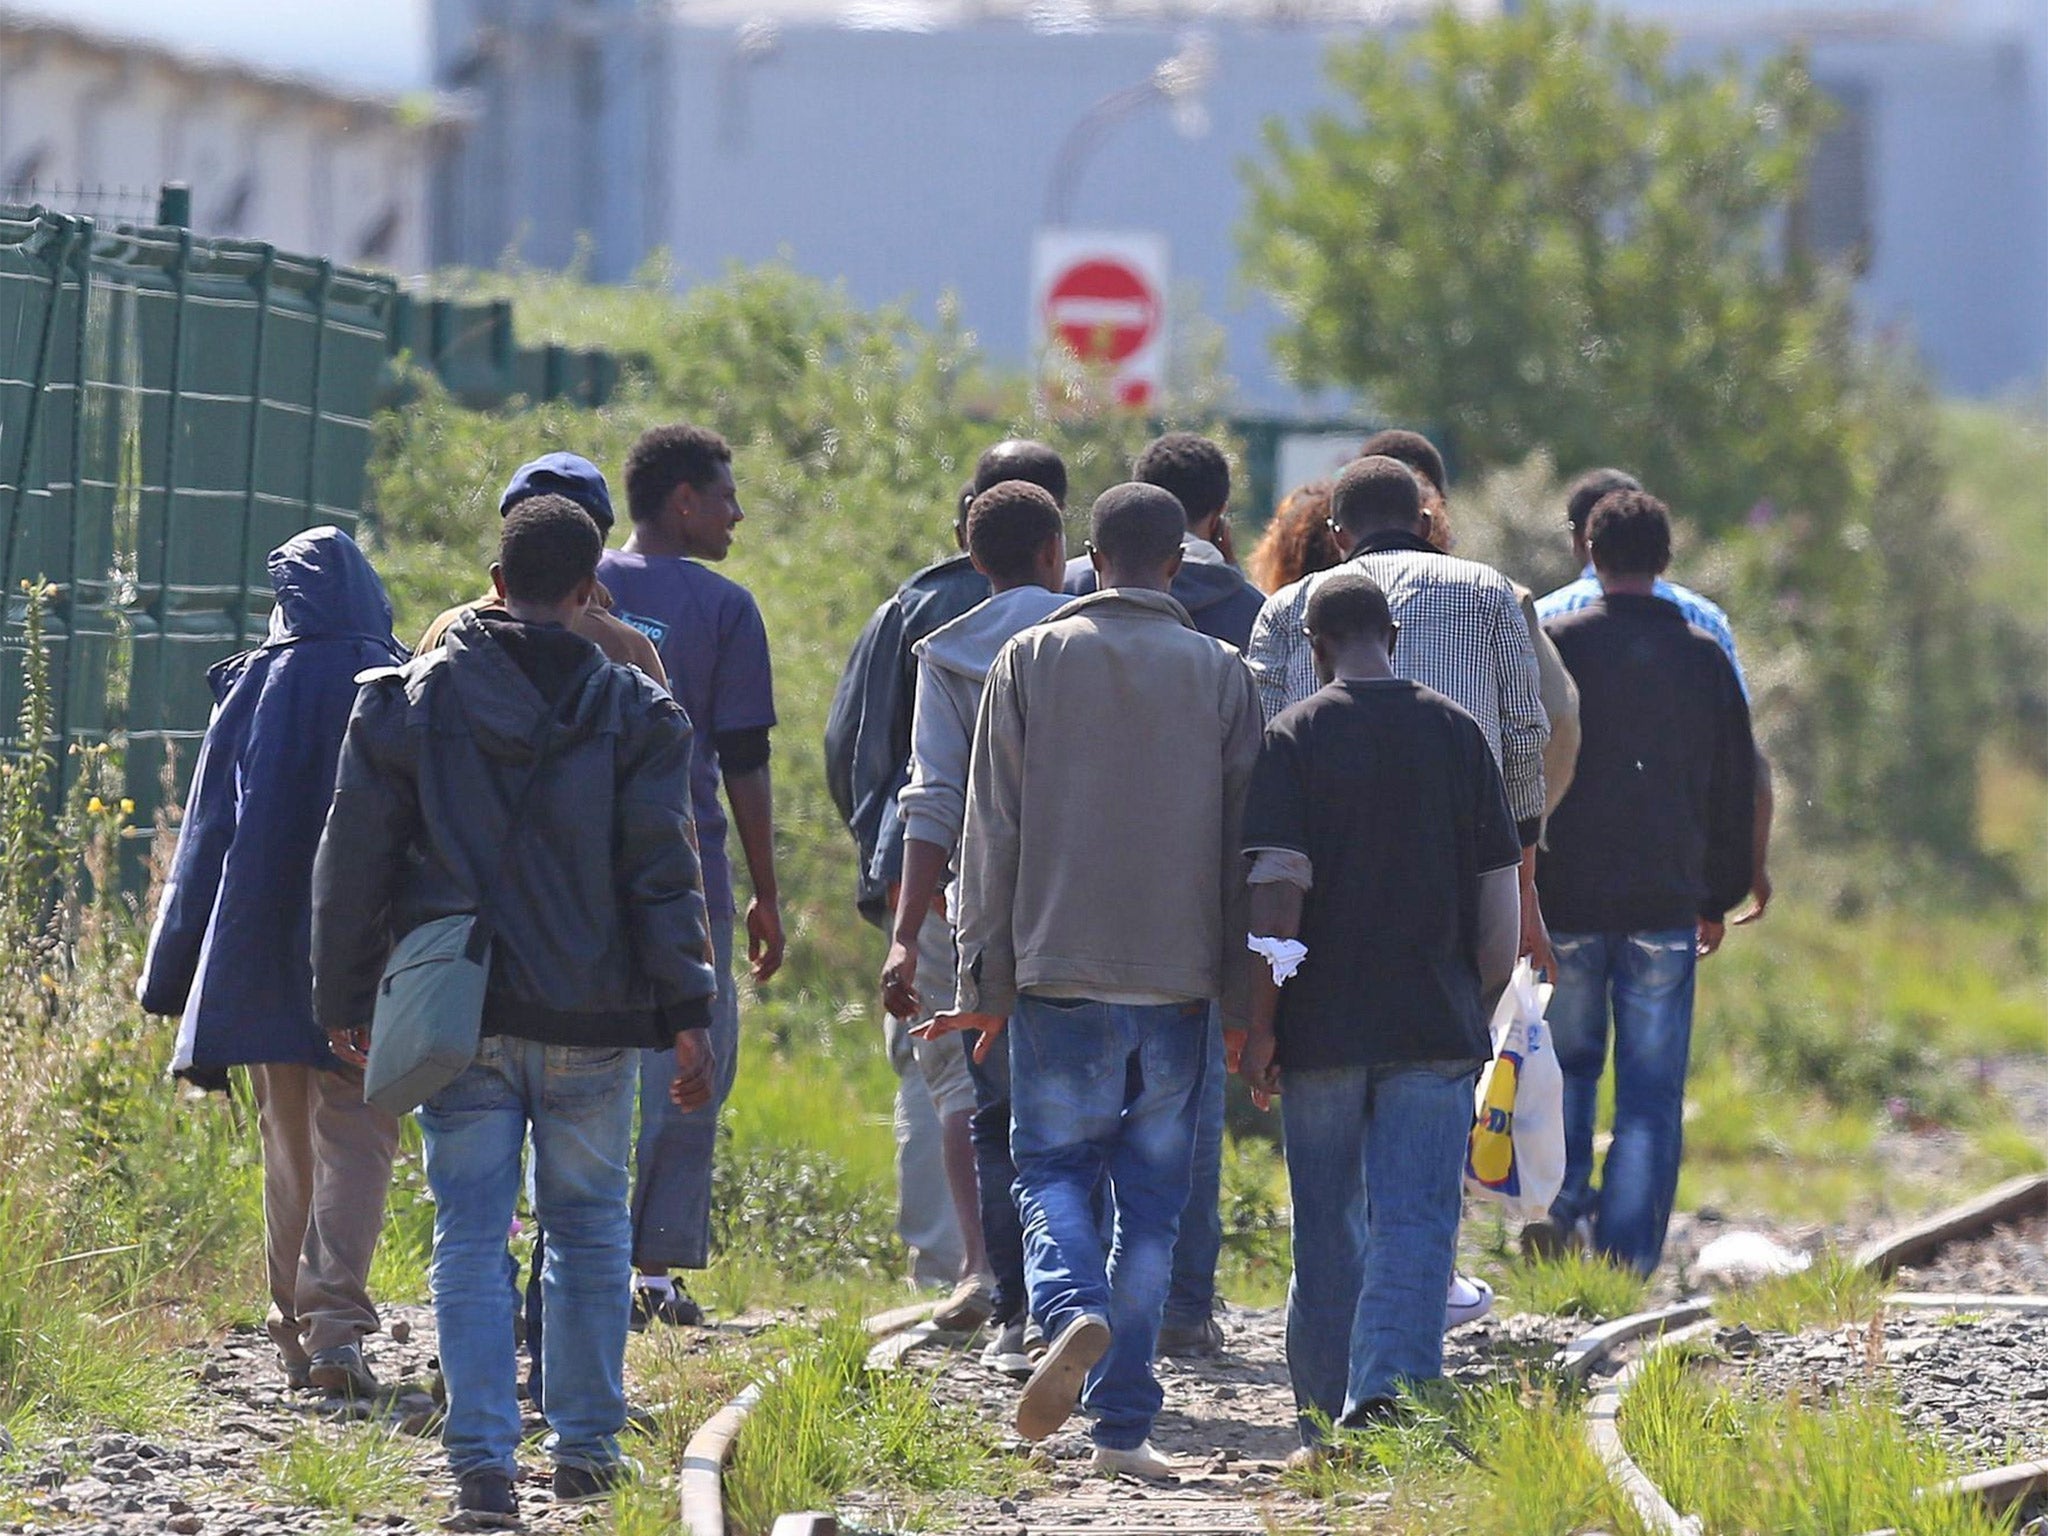 A group of migrants make their way through Calais, heading for Britain. New rules will make it more difficult for failed asylum seekers to claim further consideration for their cases